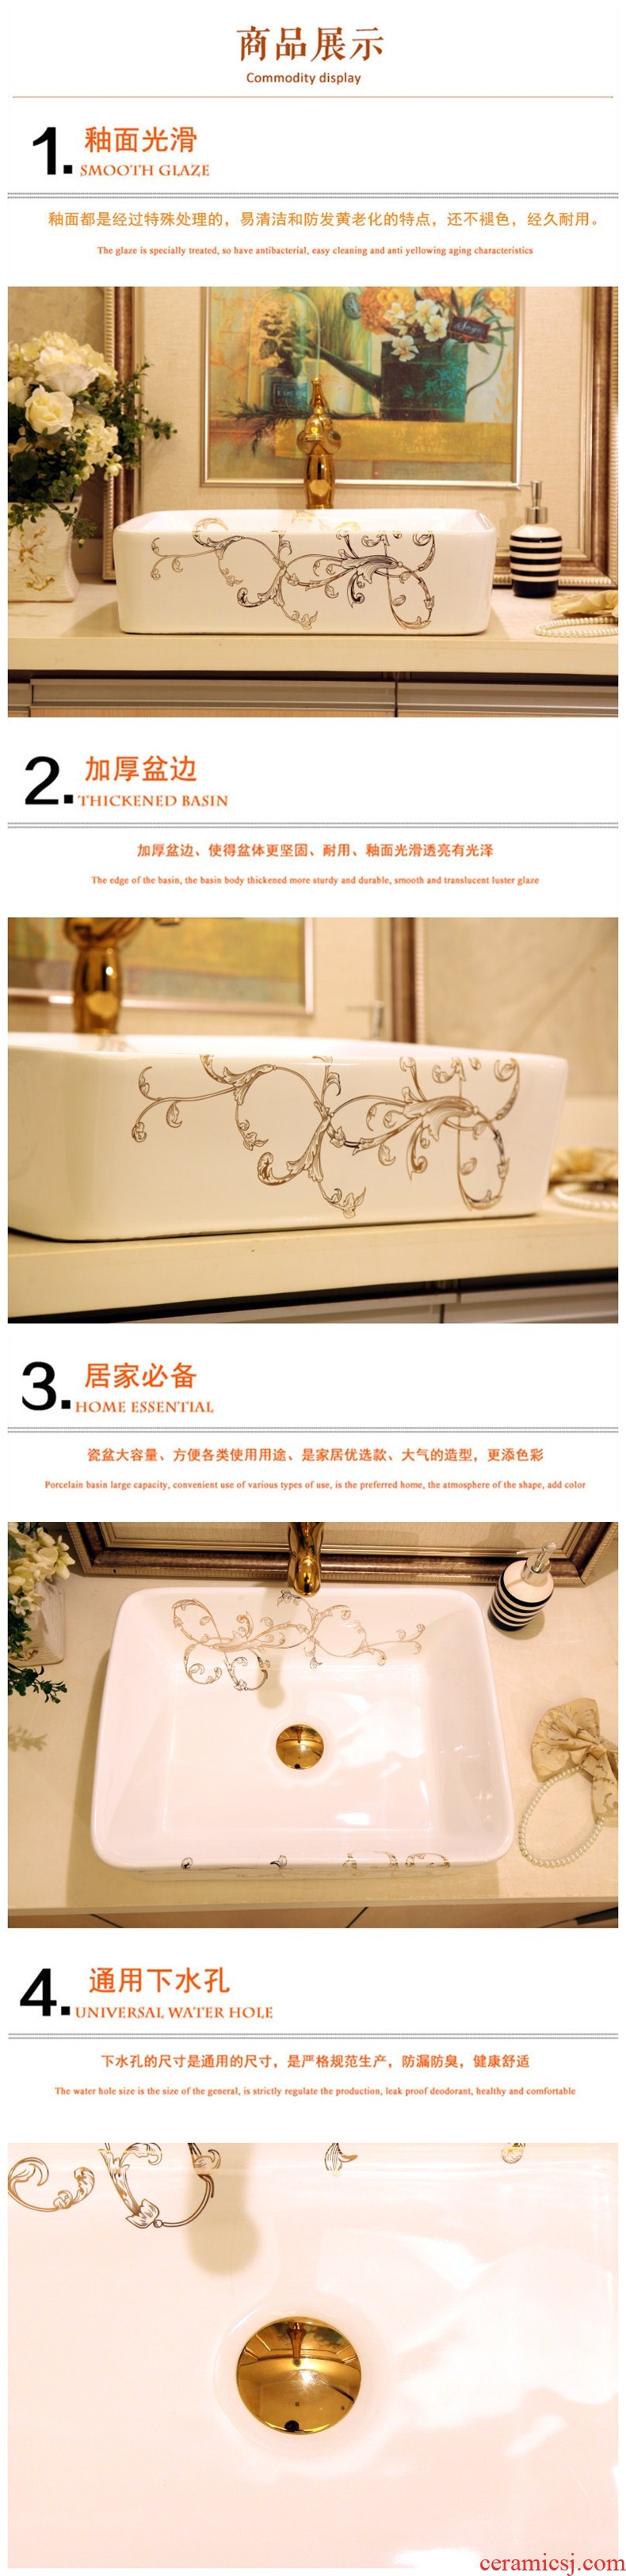 European rural hotel toilet square on the ceramic basin sink increase stage of the basin that wash a face basin art basin